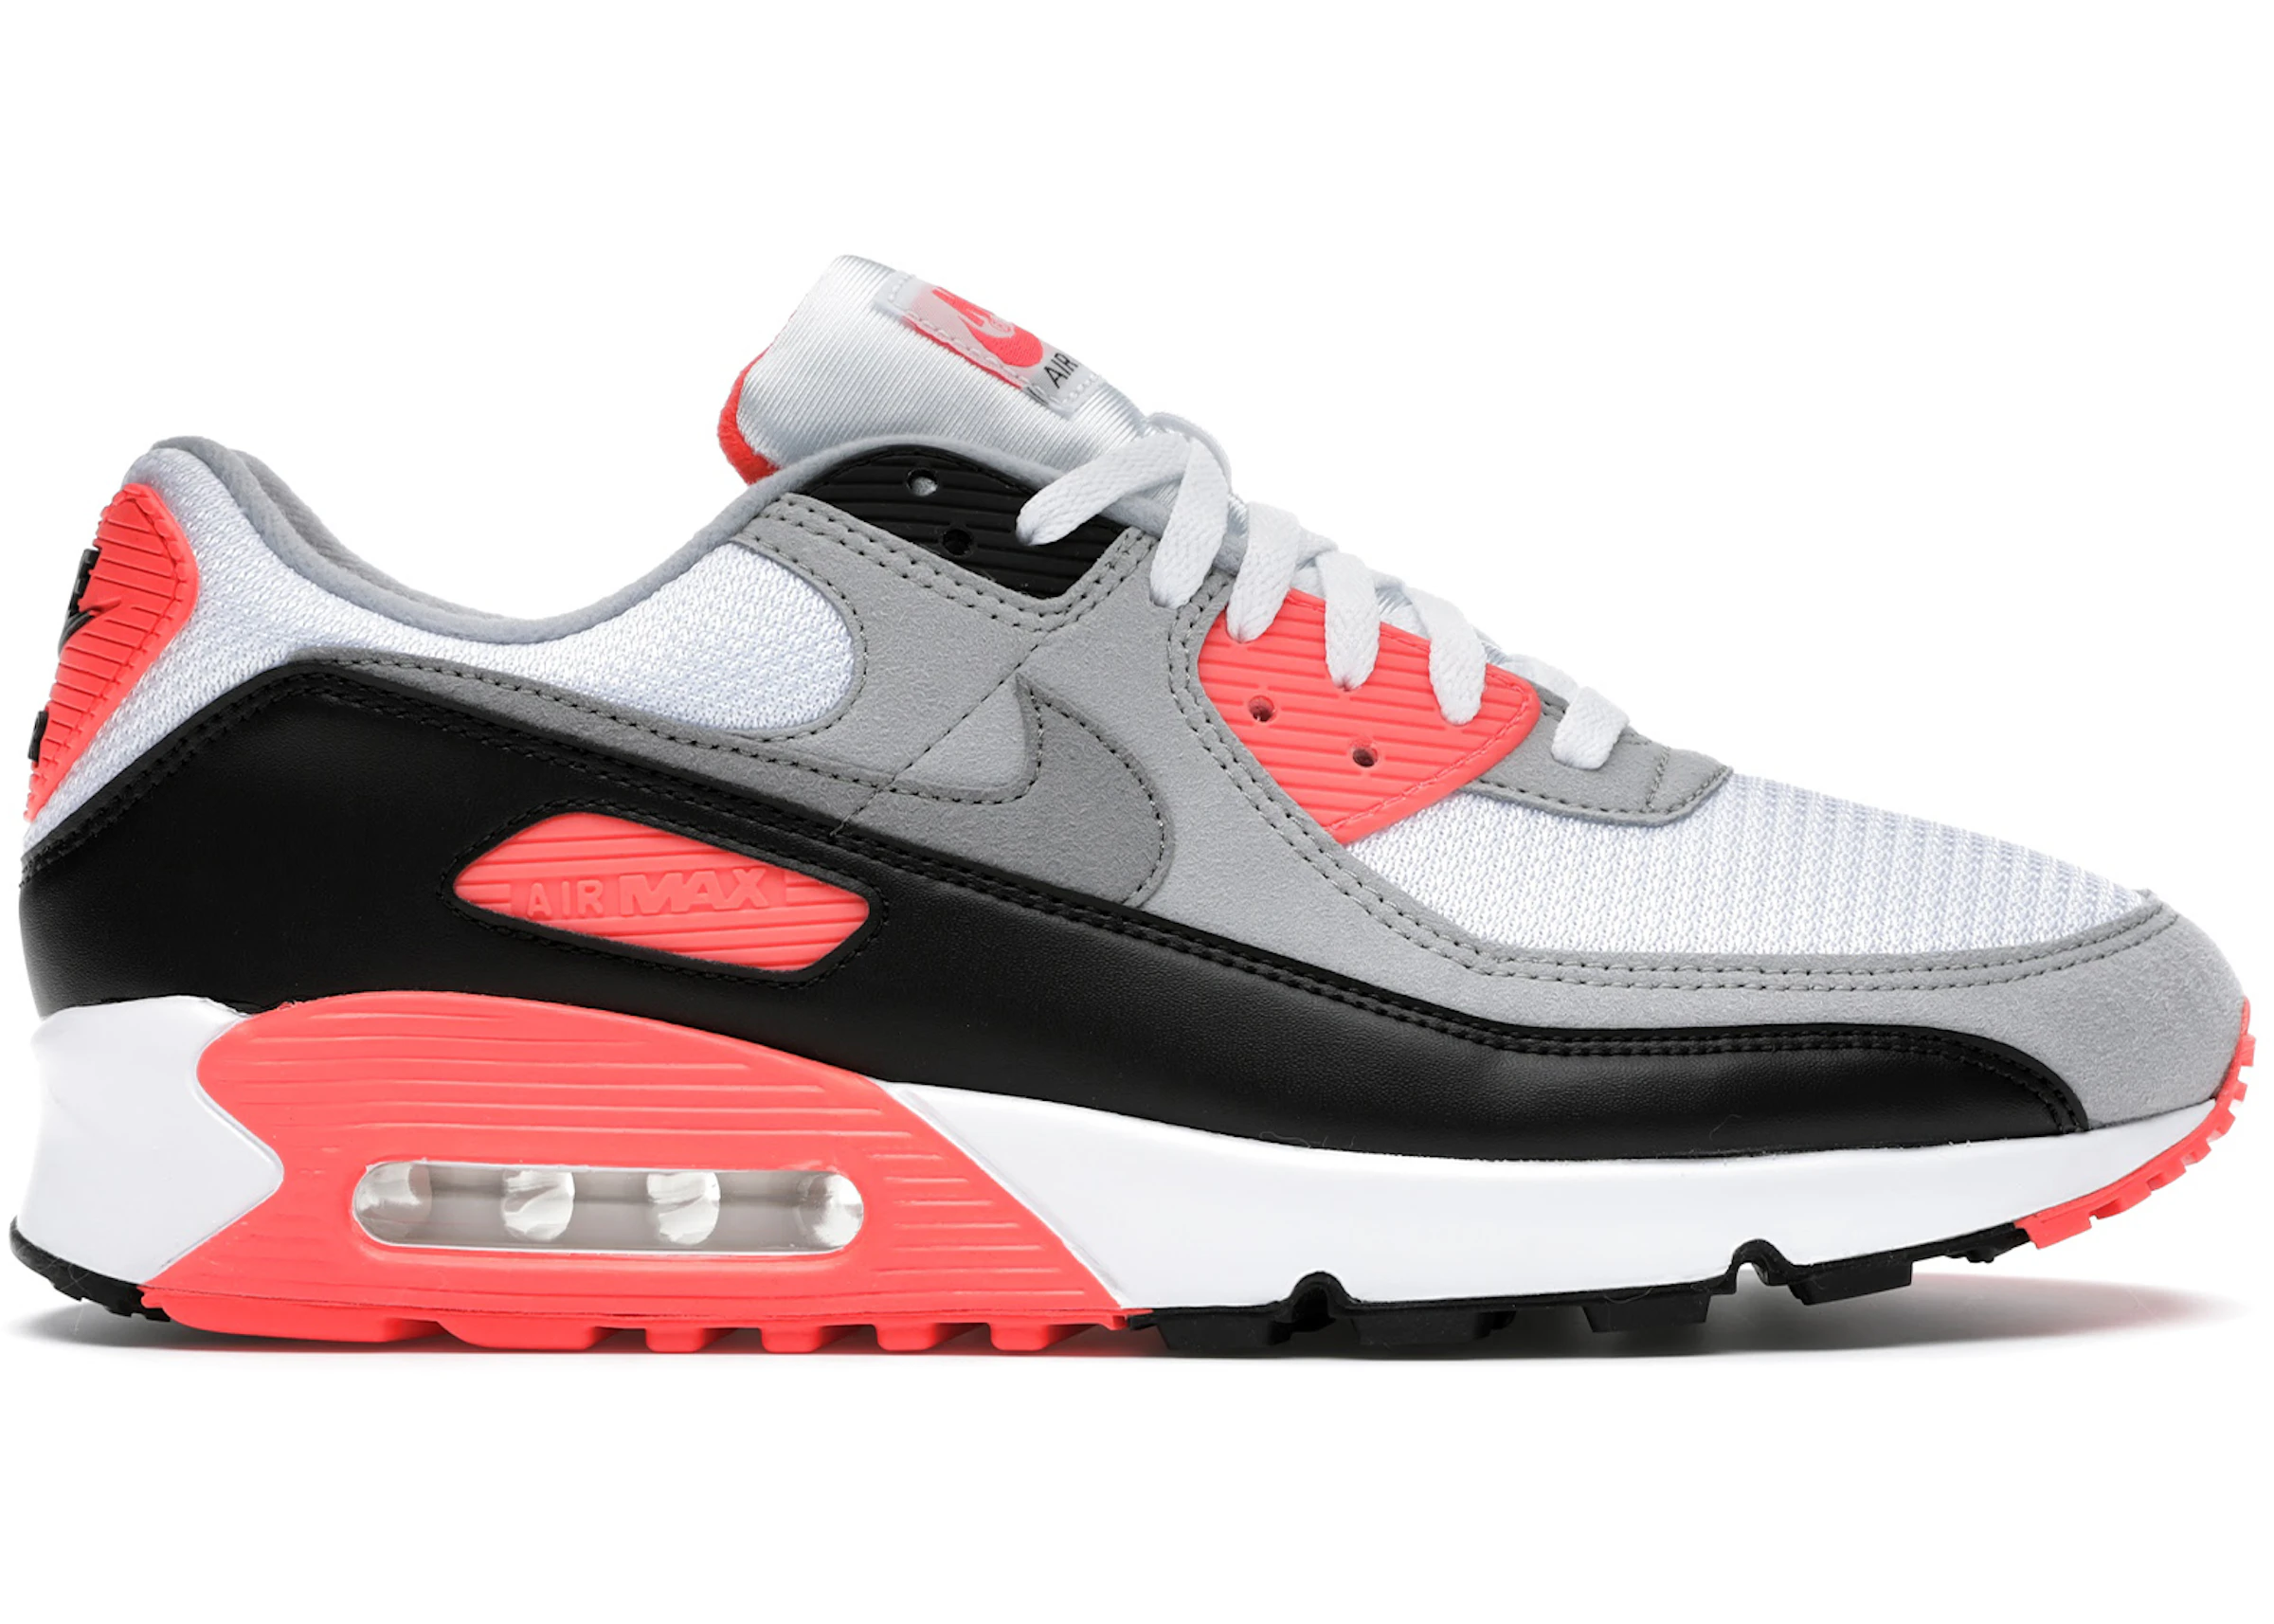 Don't want to invent chicken Air Max 90 - All Sizes & Colorways at StockX